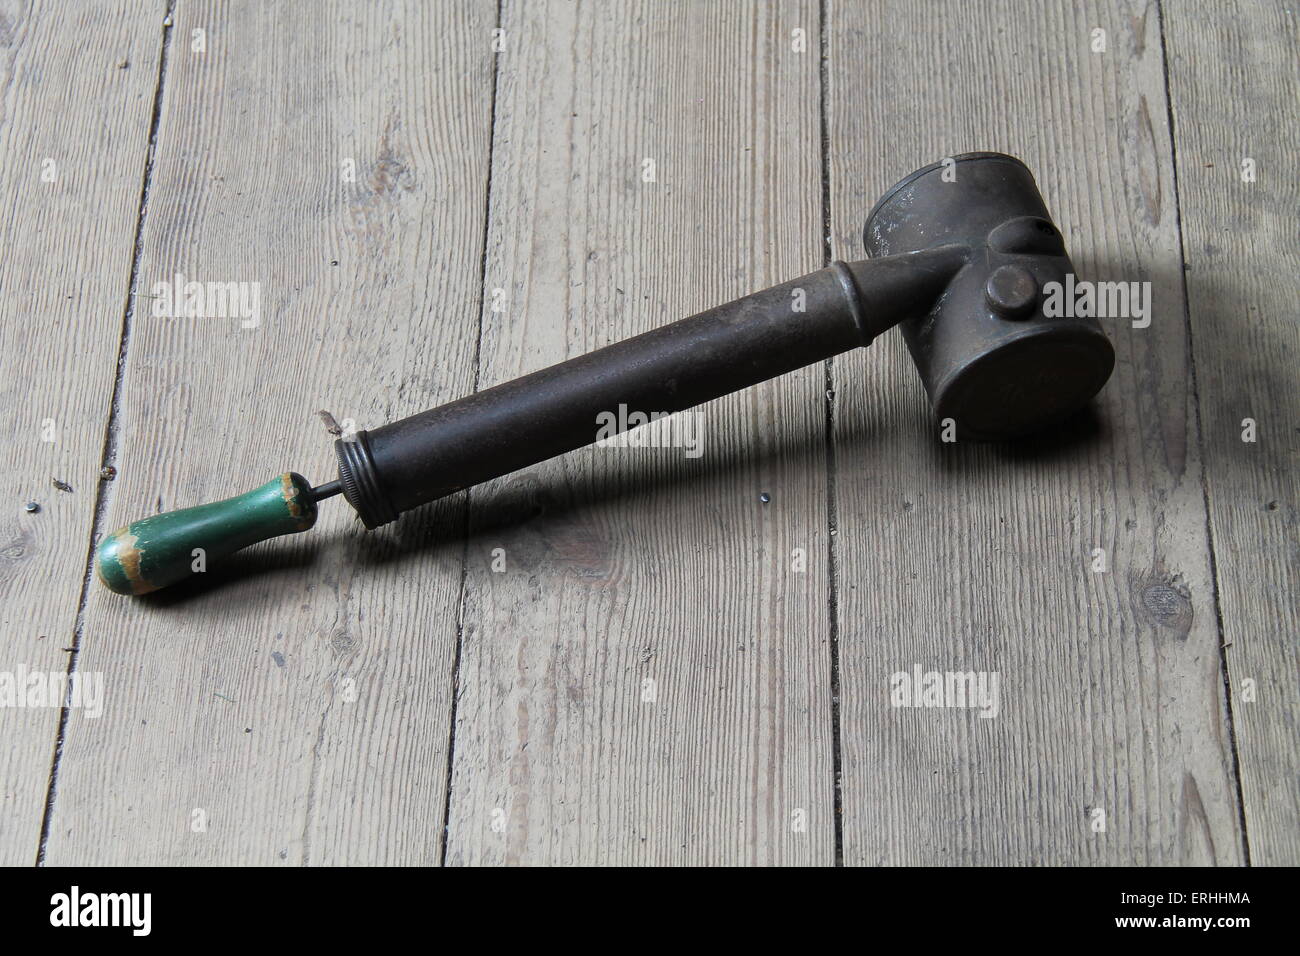 A Hand Held Vintage Pump Action Plant Spray. Stock Photo